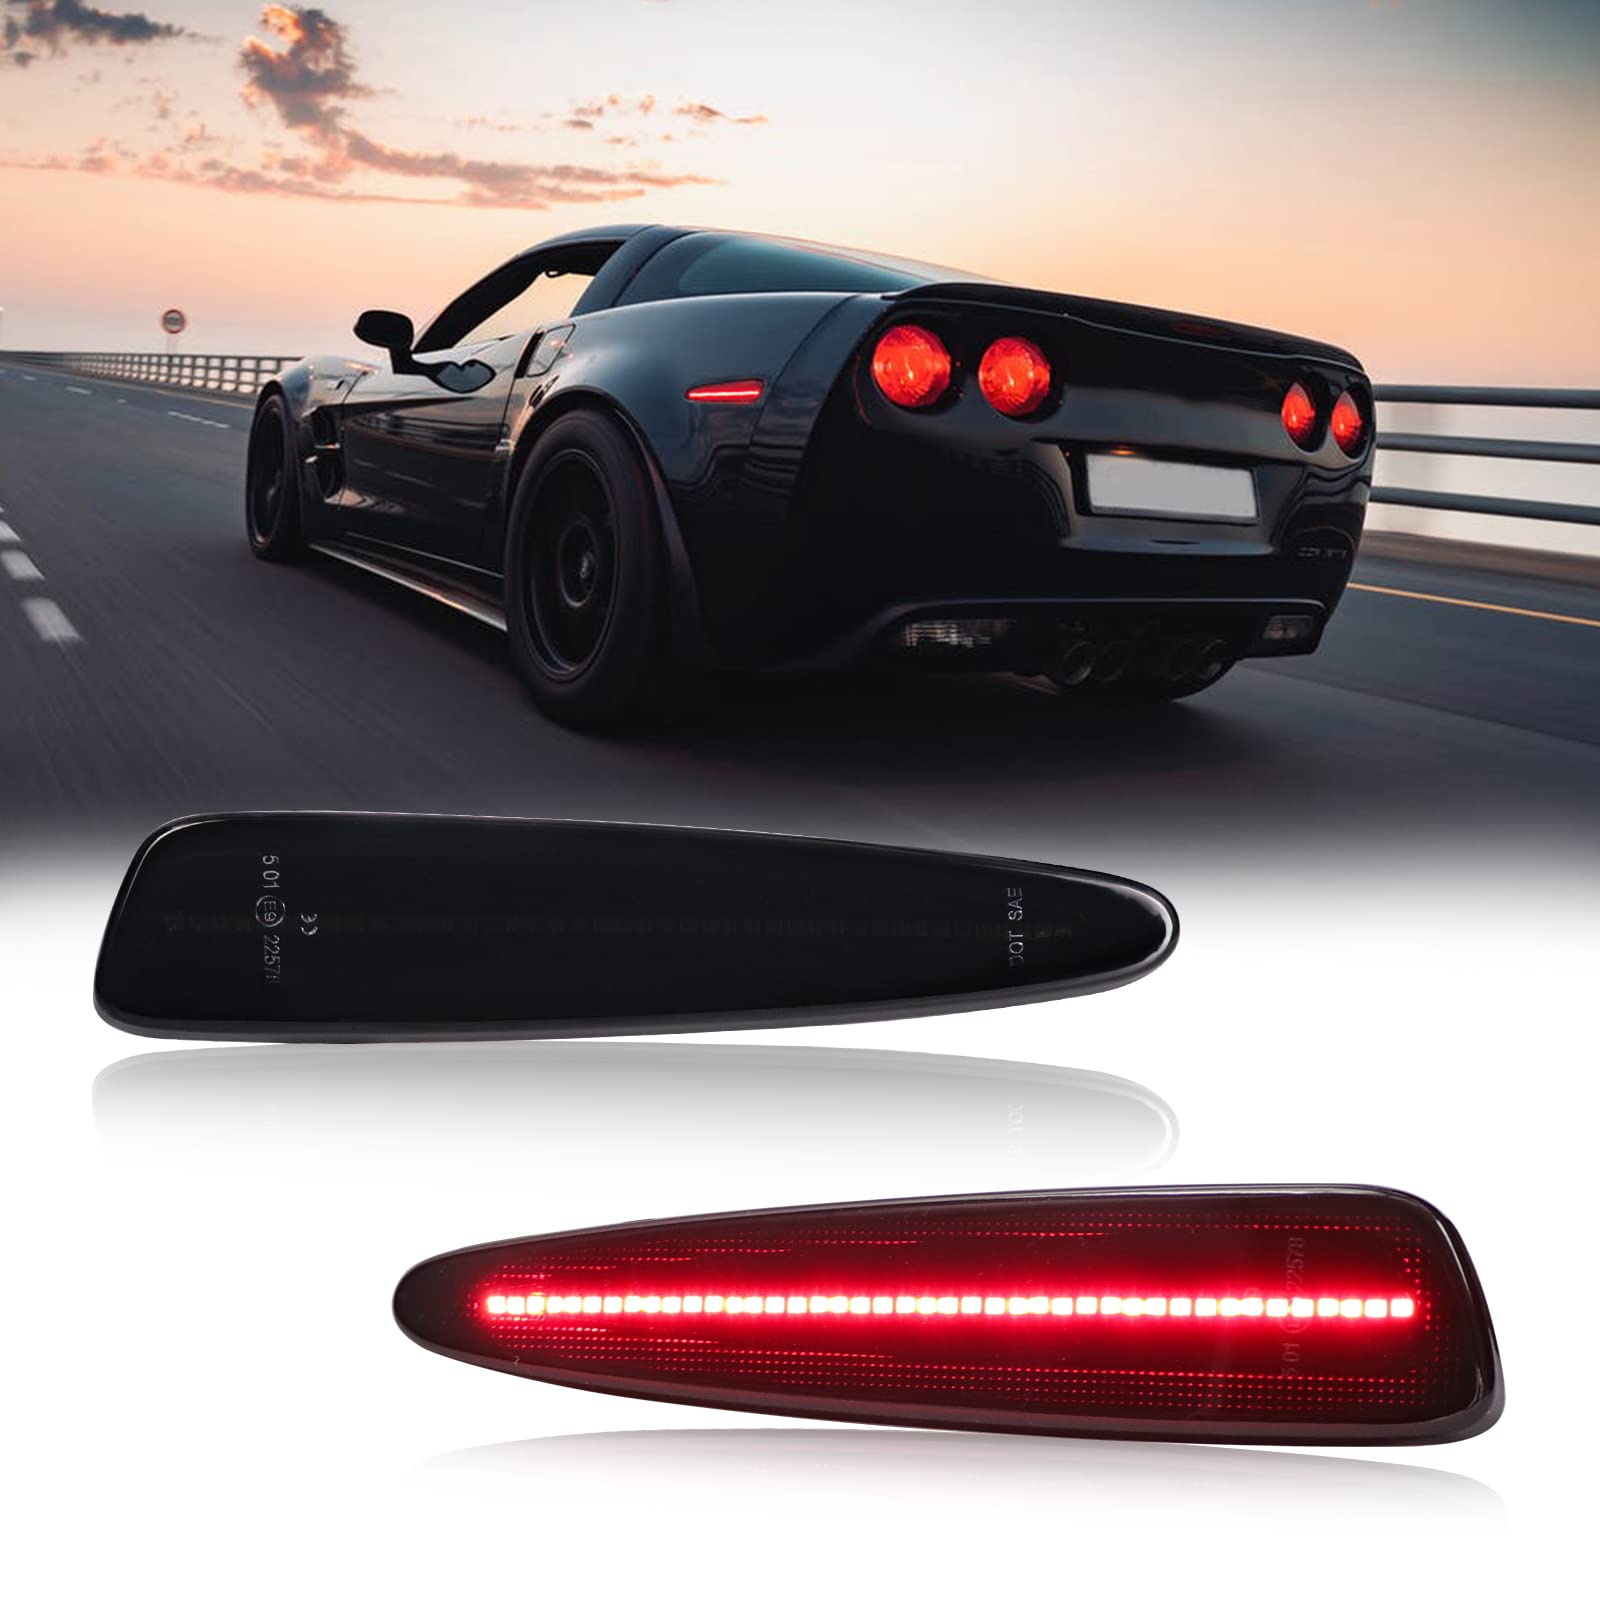 FetonAuto LED Side Marker Light Kits for Chevrolet Chevy Corvette C6 2005-2013, Smoked Lens Red Rear Bumper Sidemarker Indicator Lamps Assembly Replacement von FetonAuto